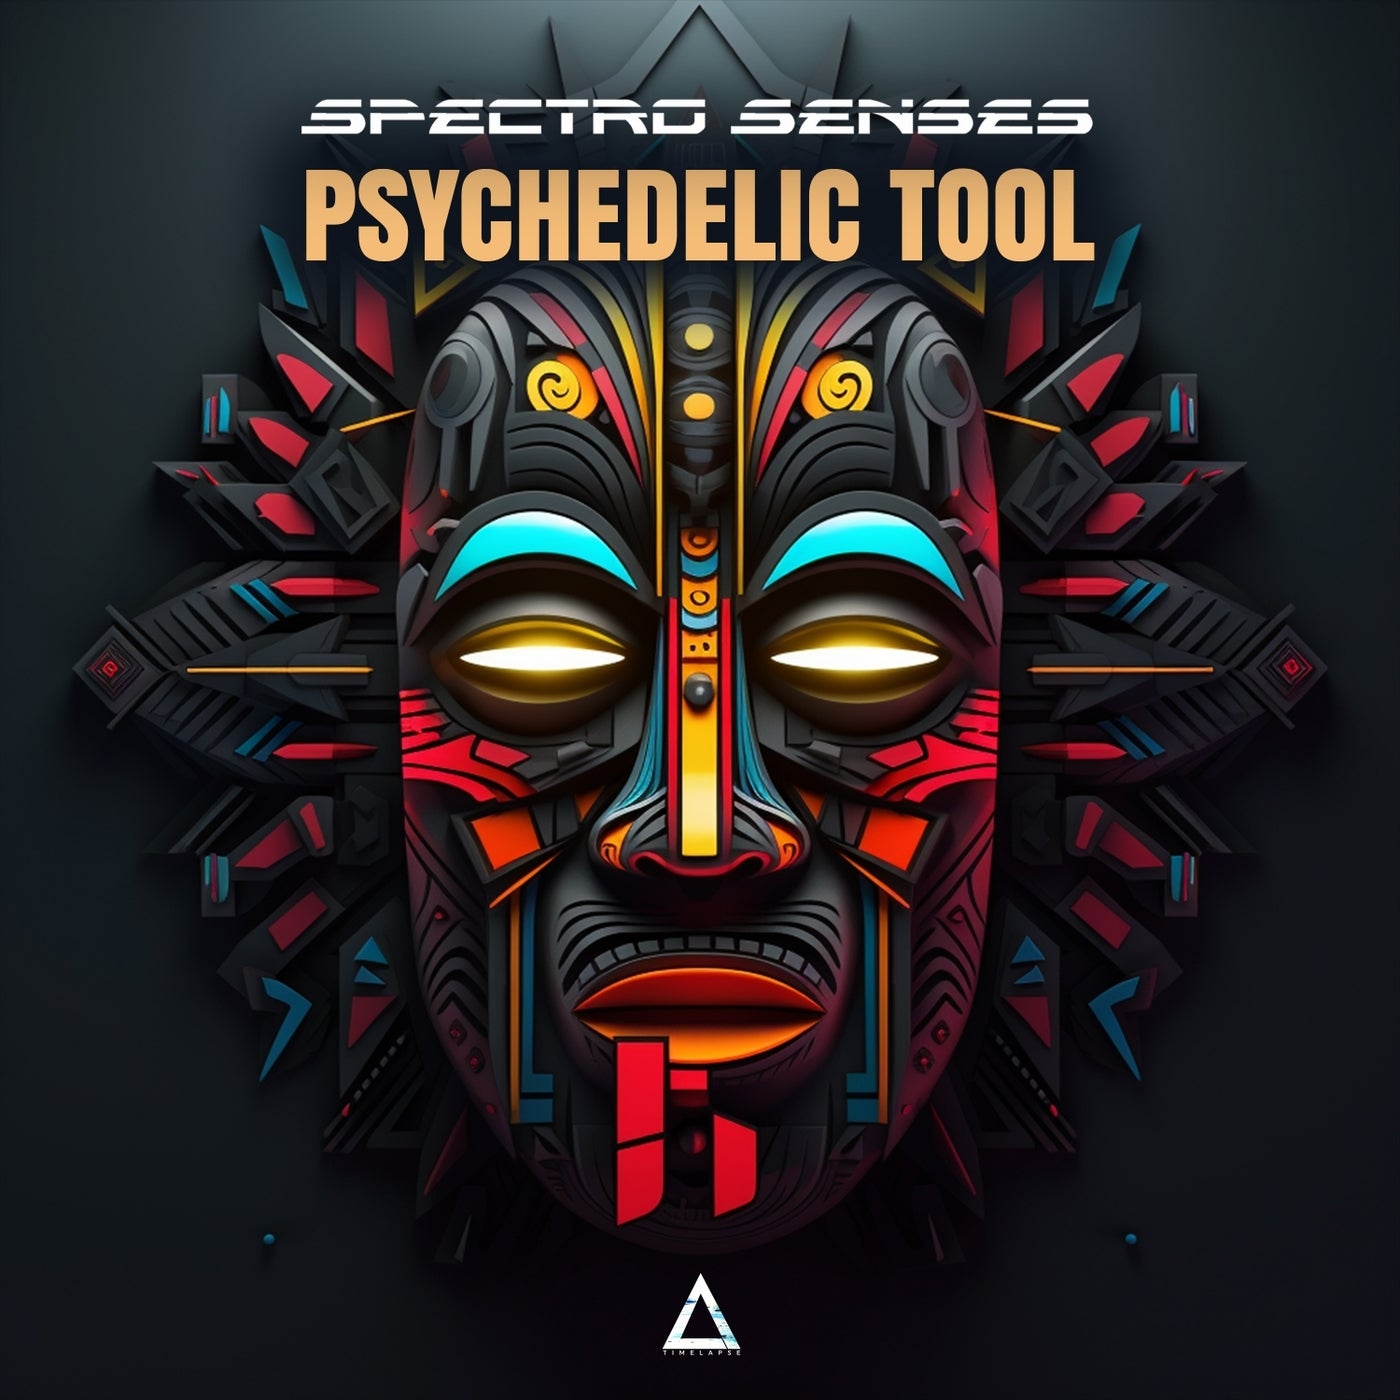 Psychedelic Tool